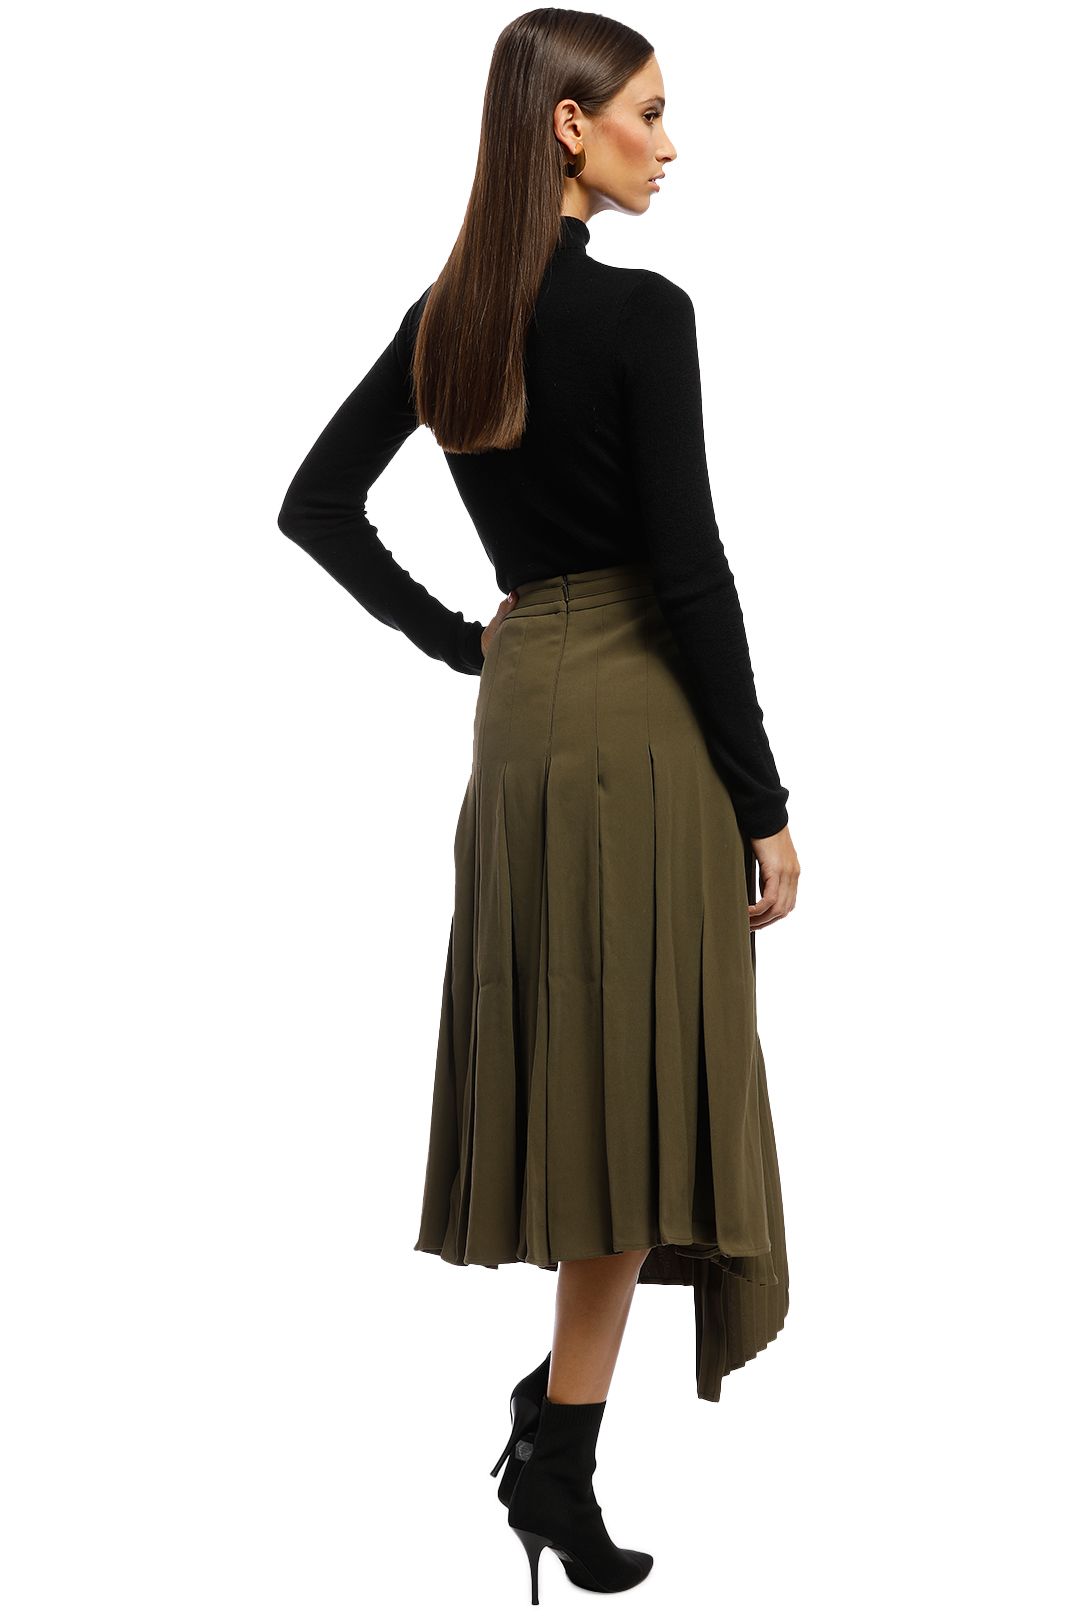 Friend of Audrey - Nathalie Pleated Asymmetry Skirt - Olive - Back